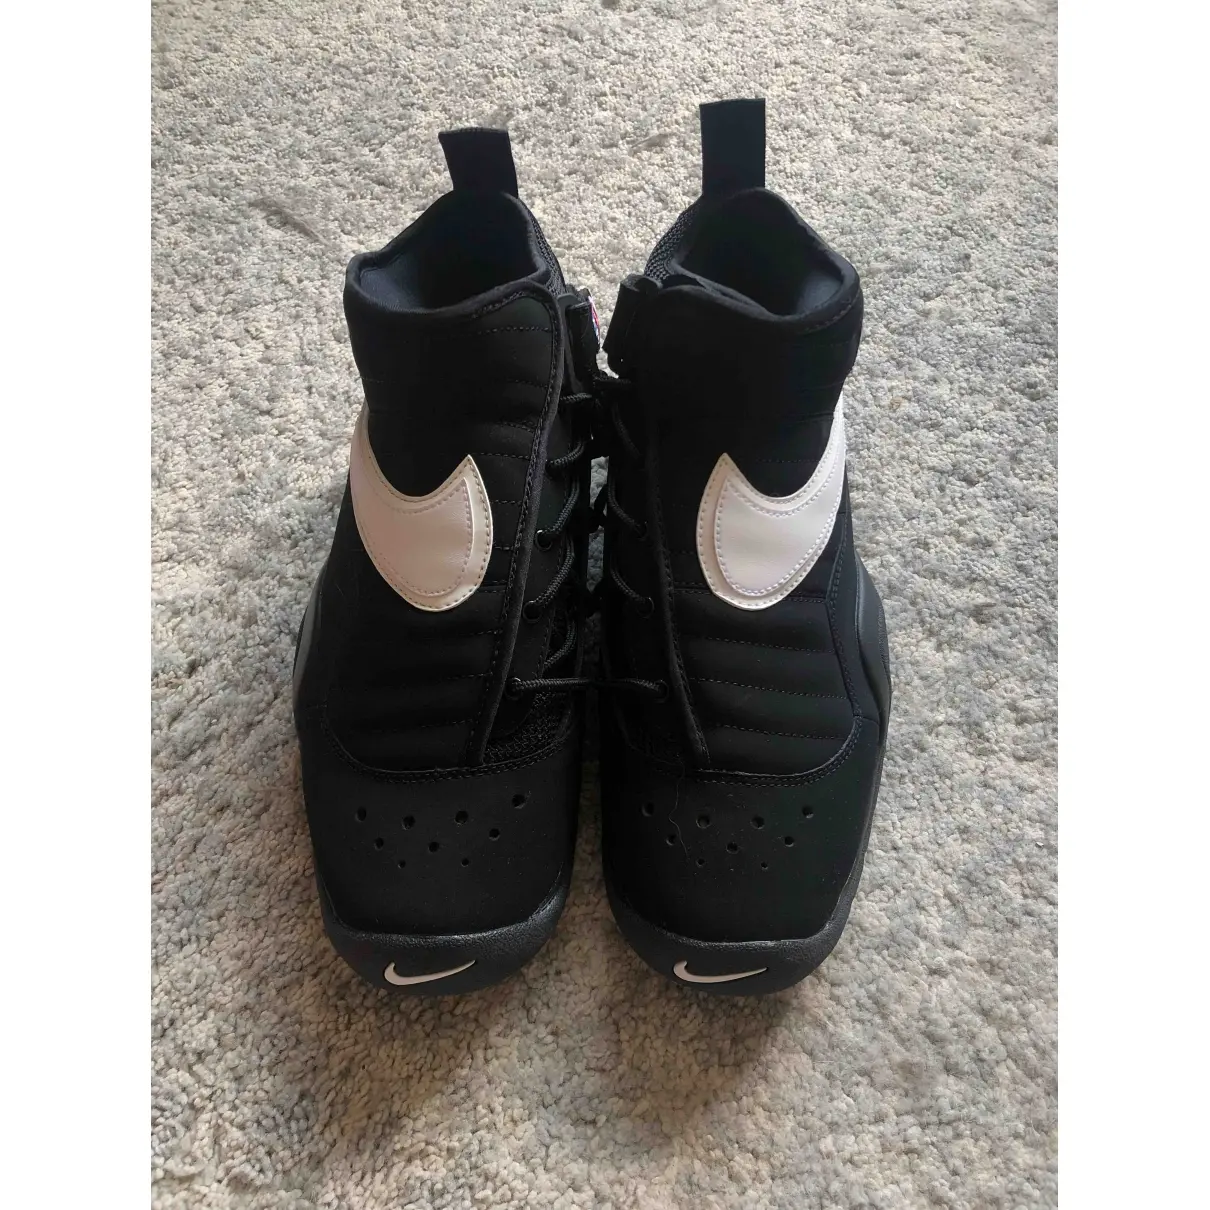 Buy Nike Cloth high trainers online